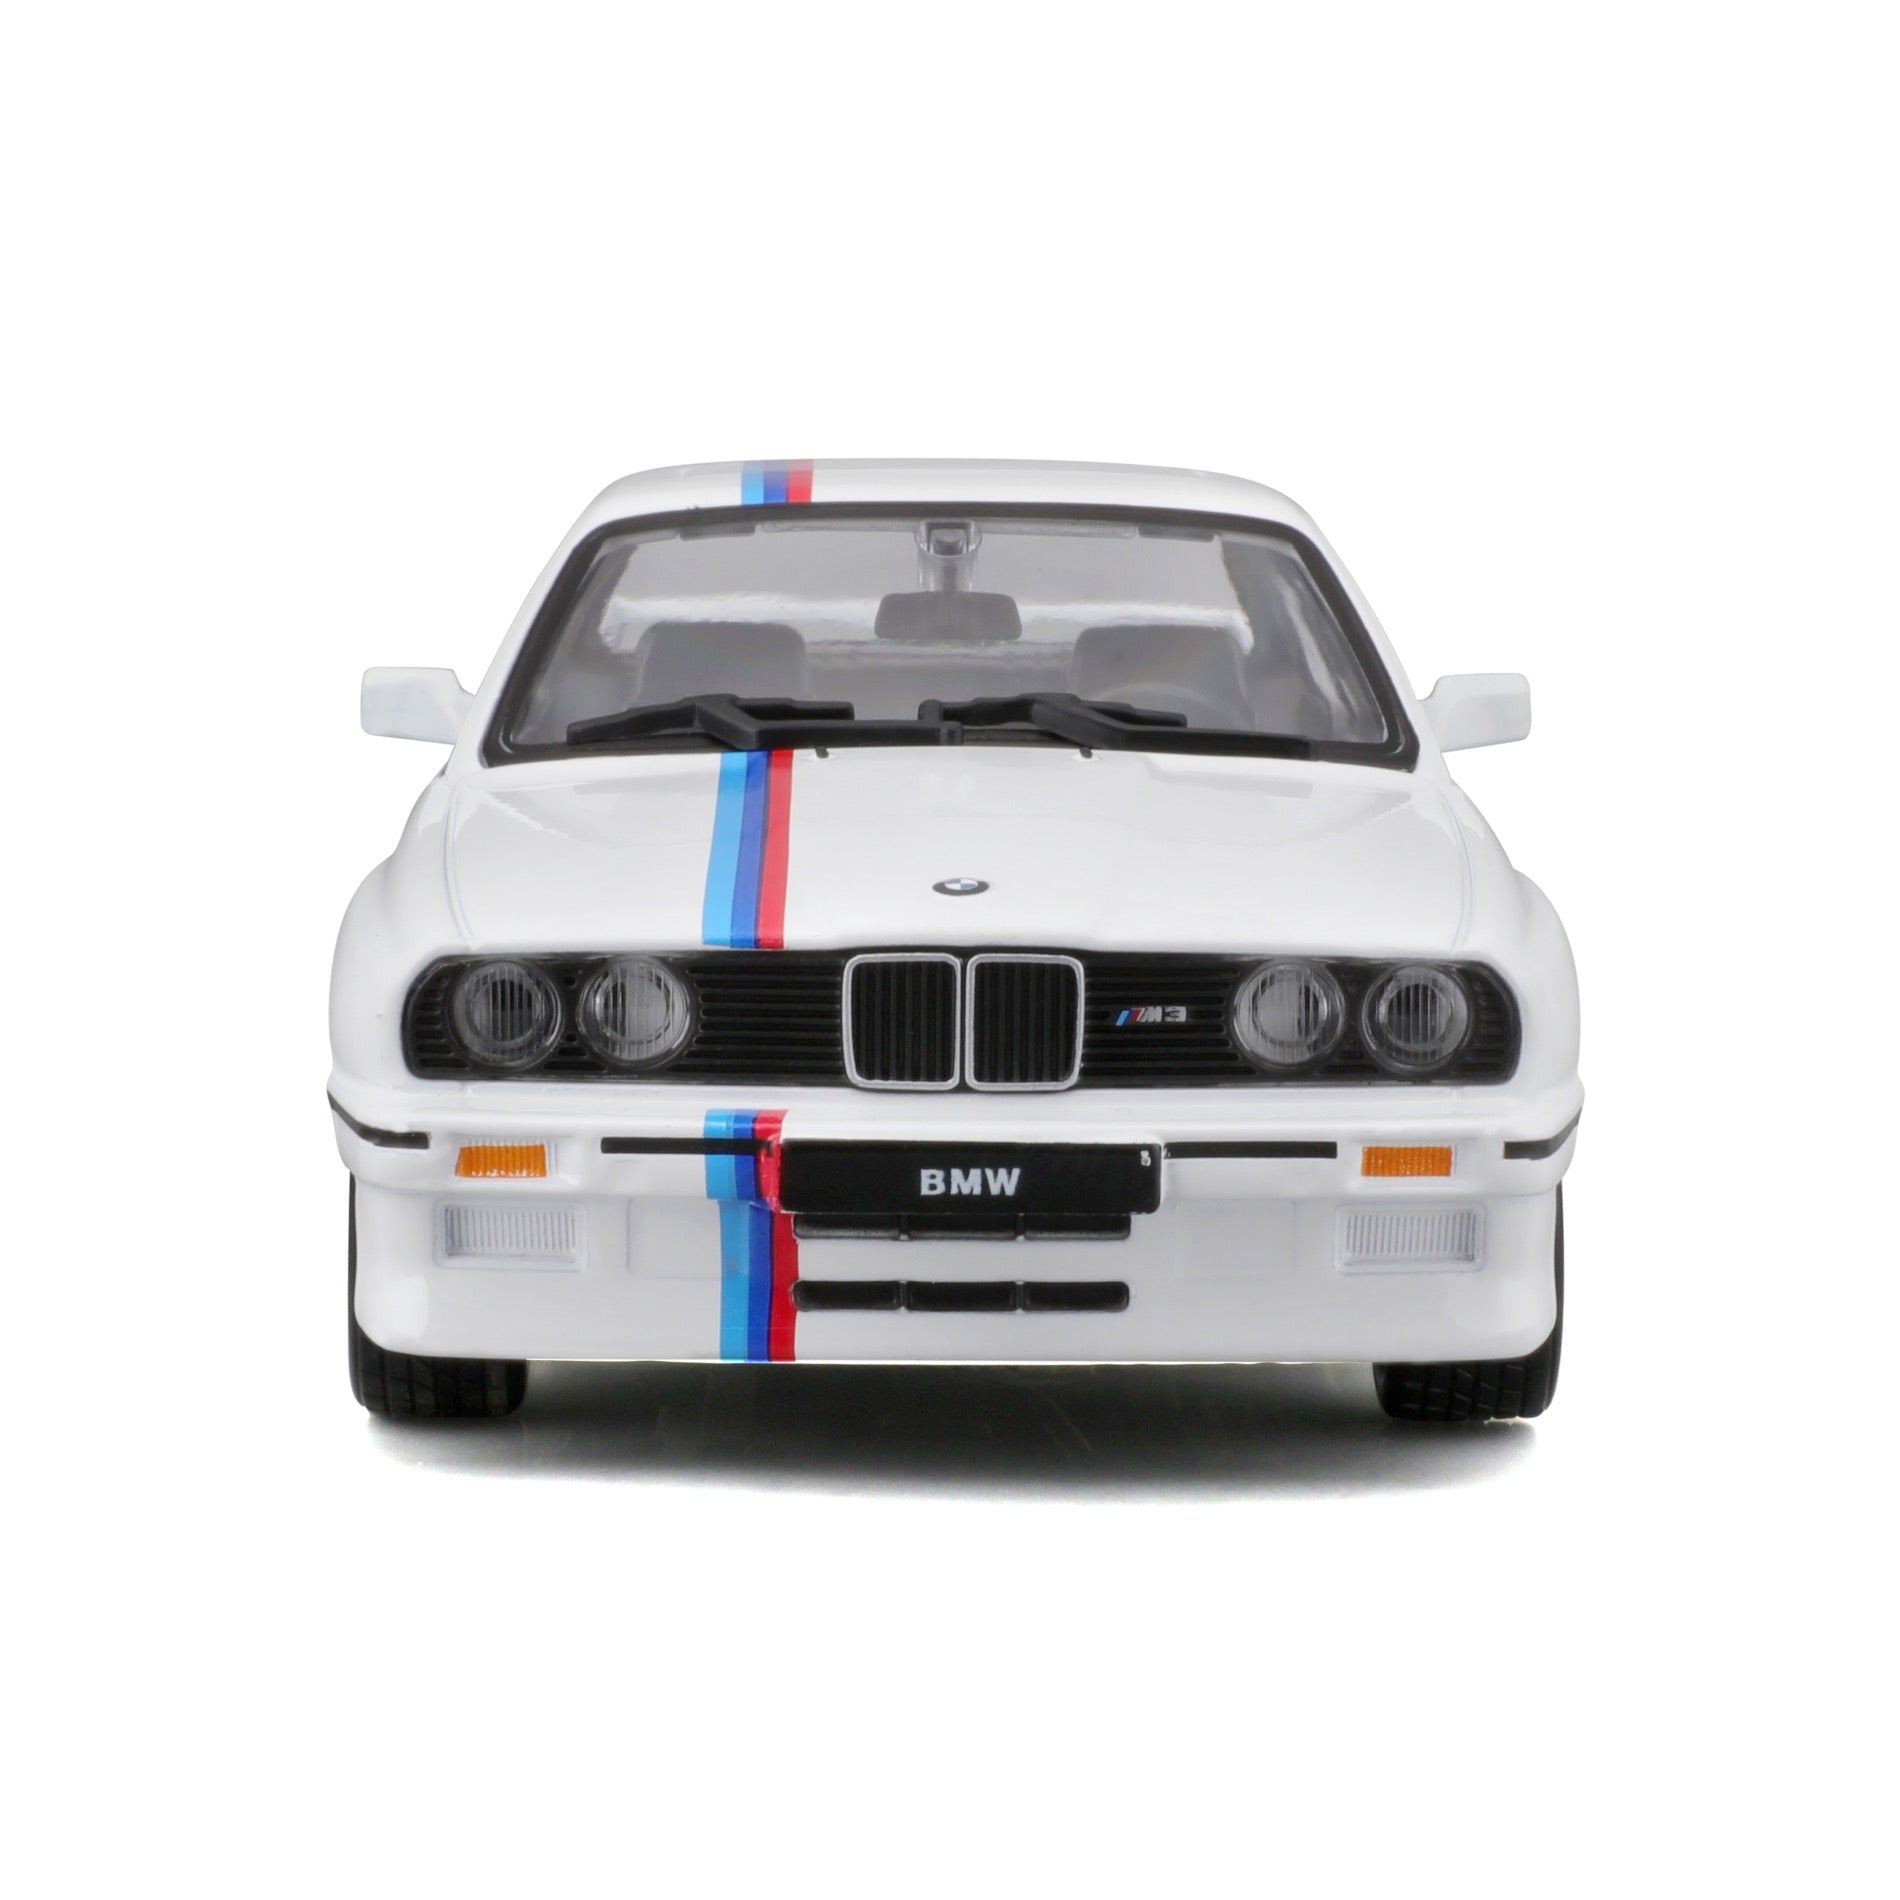 HTLNUZD Bburago 1/24 Alloy Supercar for BMW M3 E30 Racing Car Die Cast  Collection Vehicles Miniature Scale Model Collectible Gift (White)